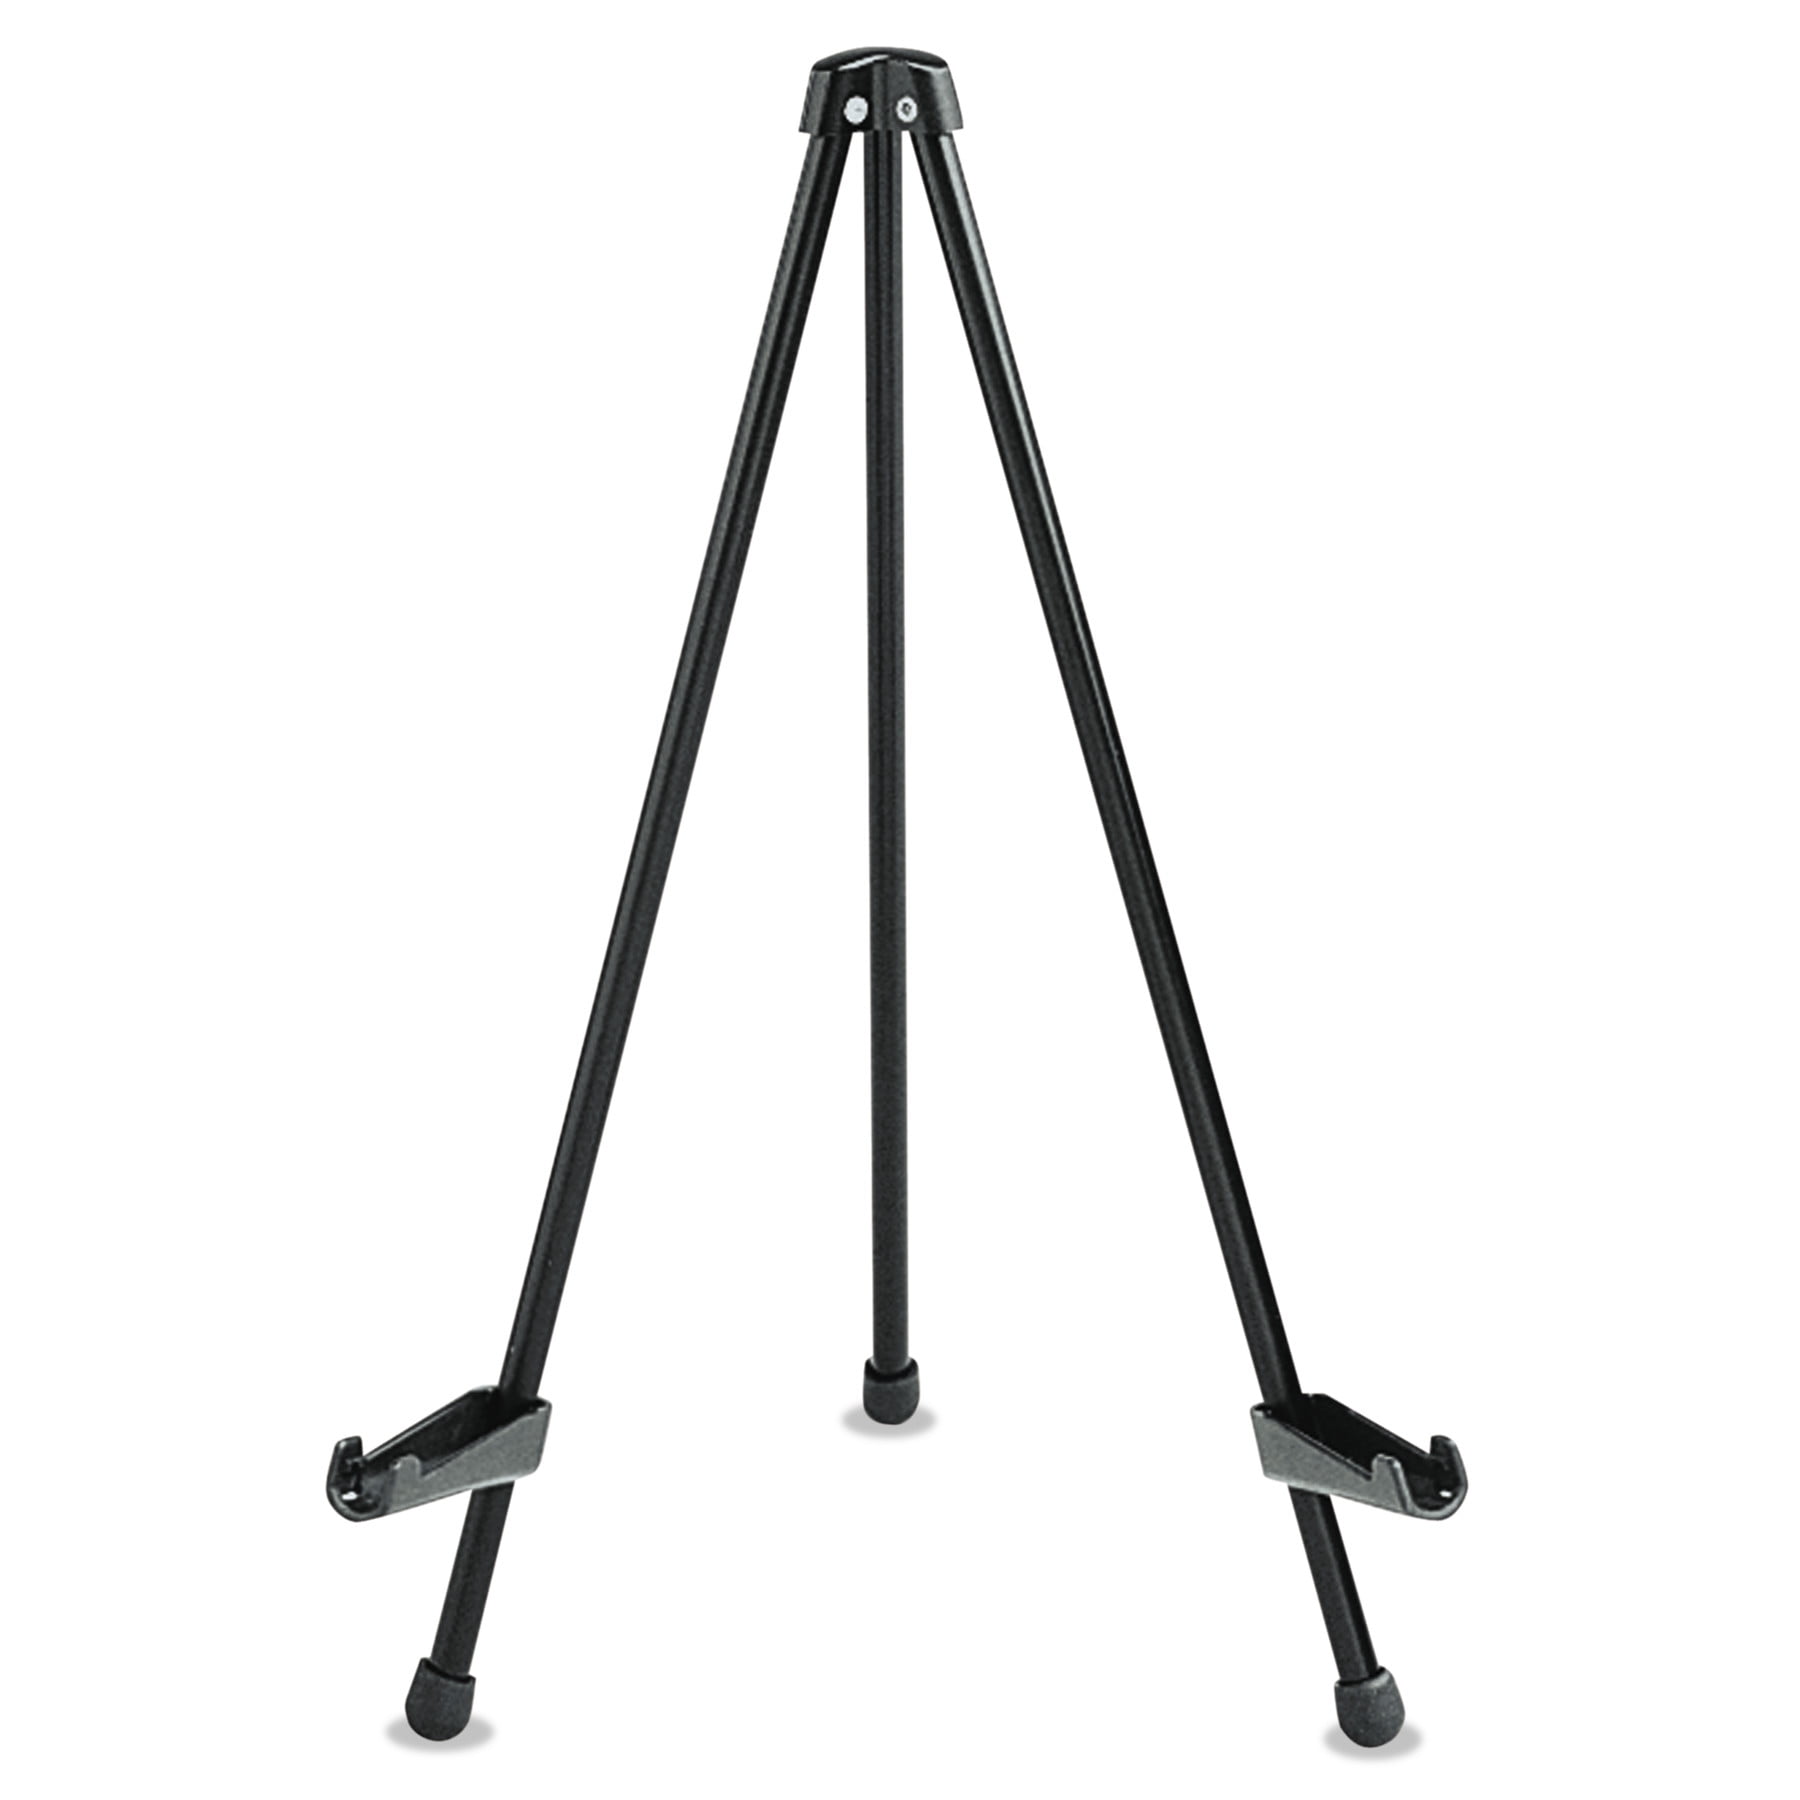 TABLETOP INSTANT EASEL DISPLAY 14" HIGH BLACK STEEL TRIPOD STAND BRAND NEW